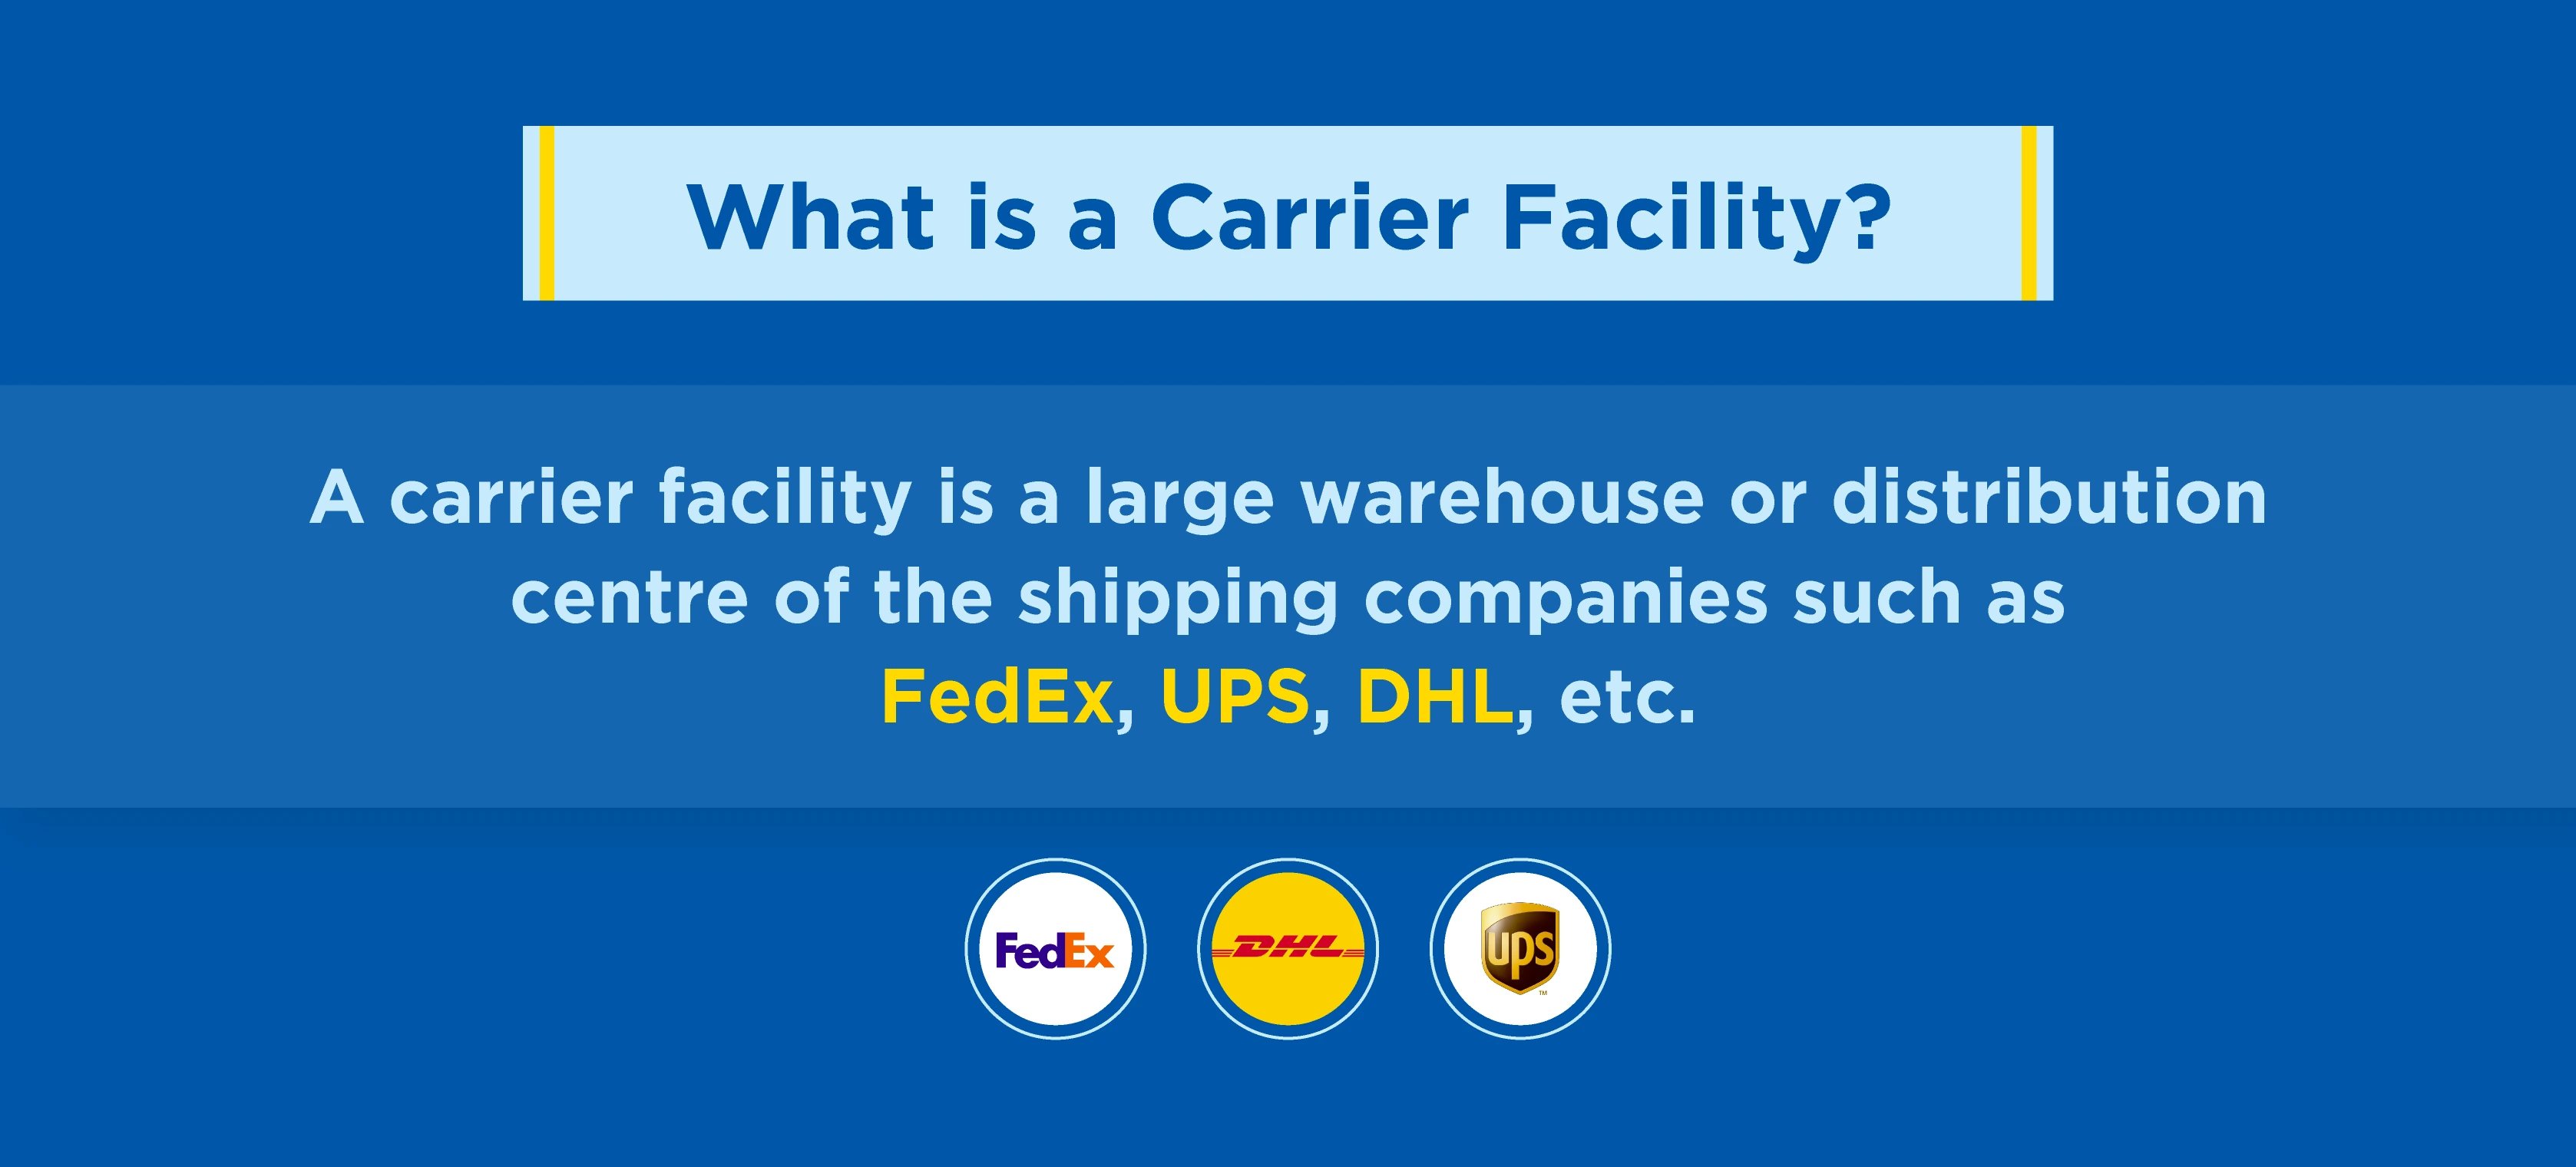 What-is-a-Carrier-Facility